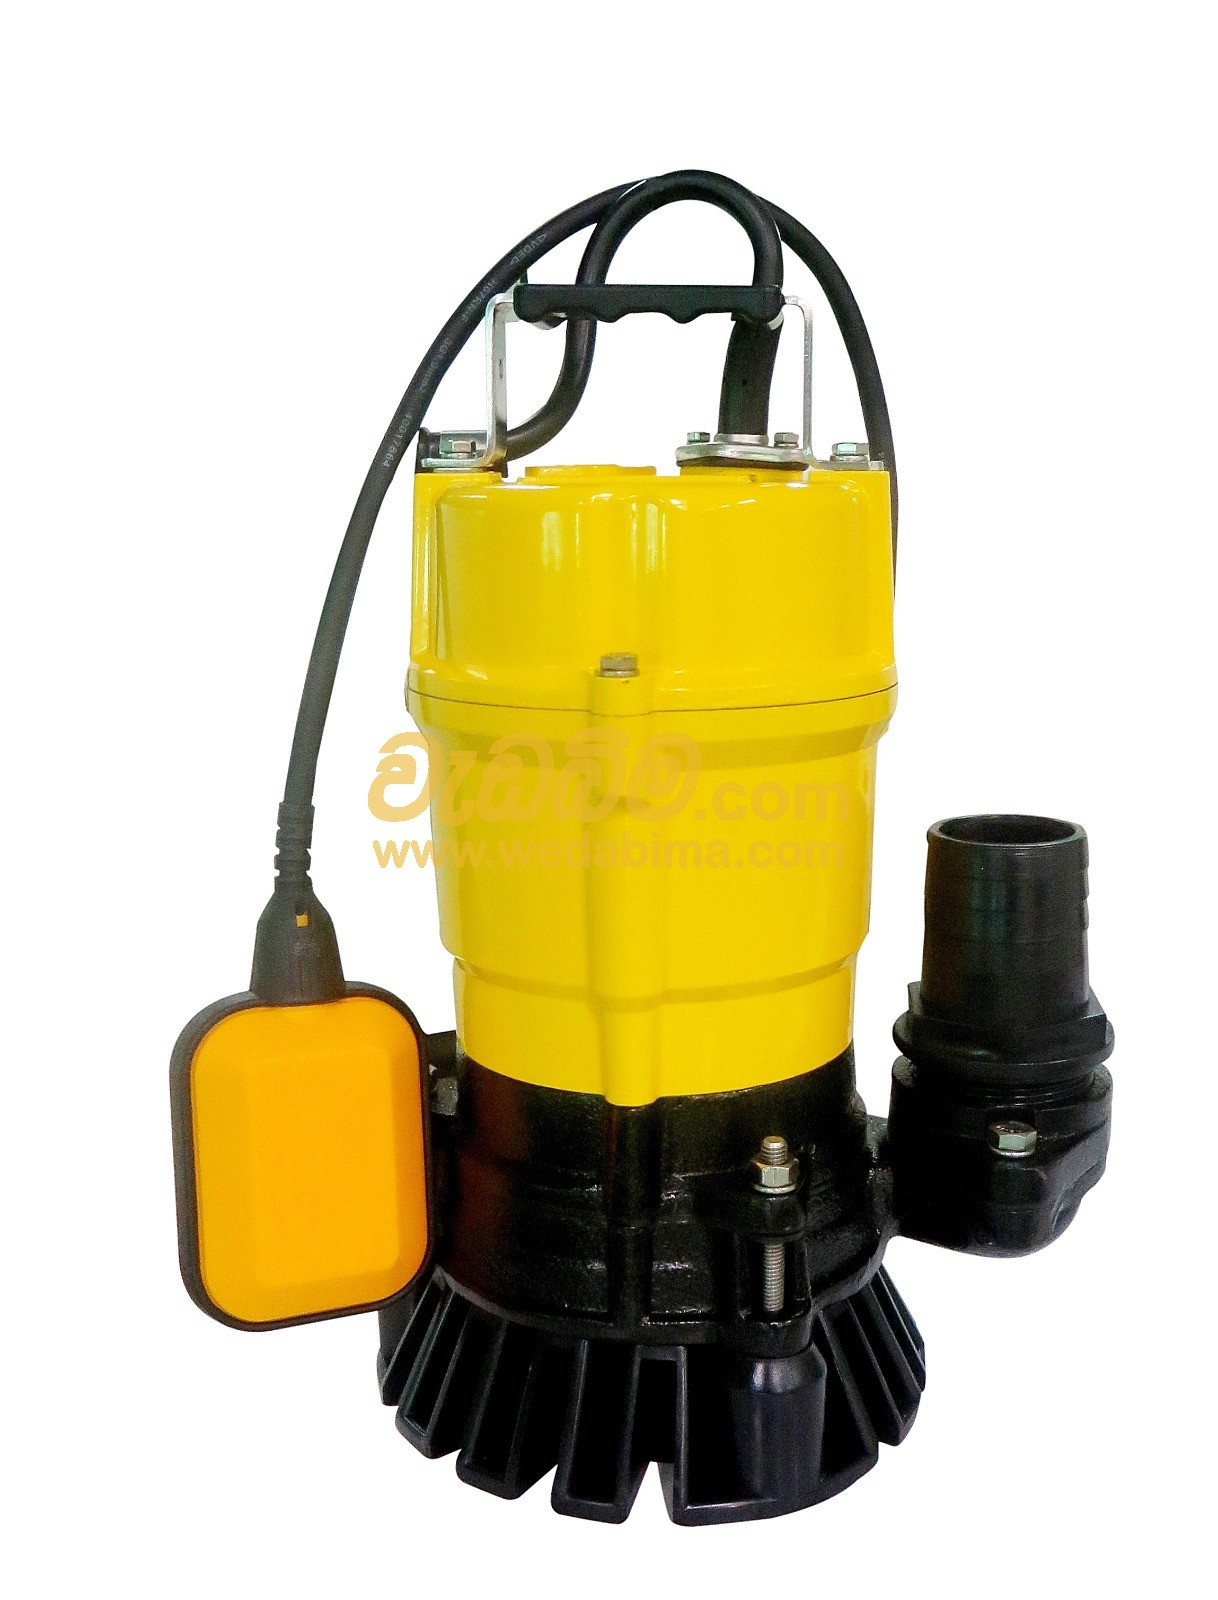 Cover image for Submersible Pump for sale in sri lanka